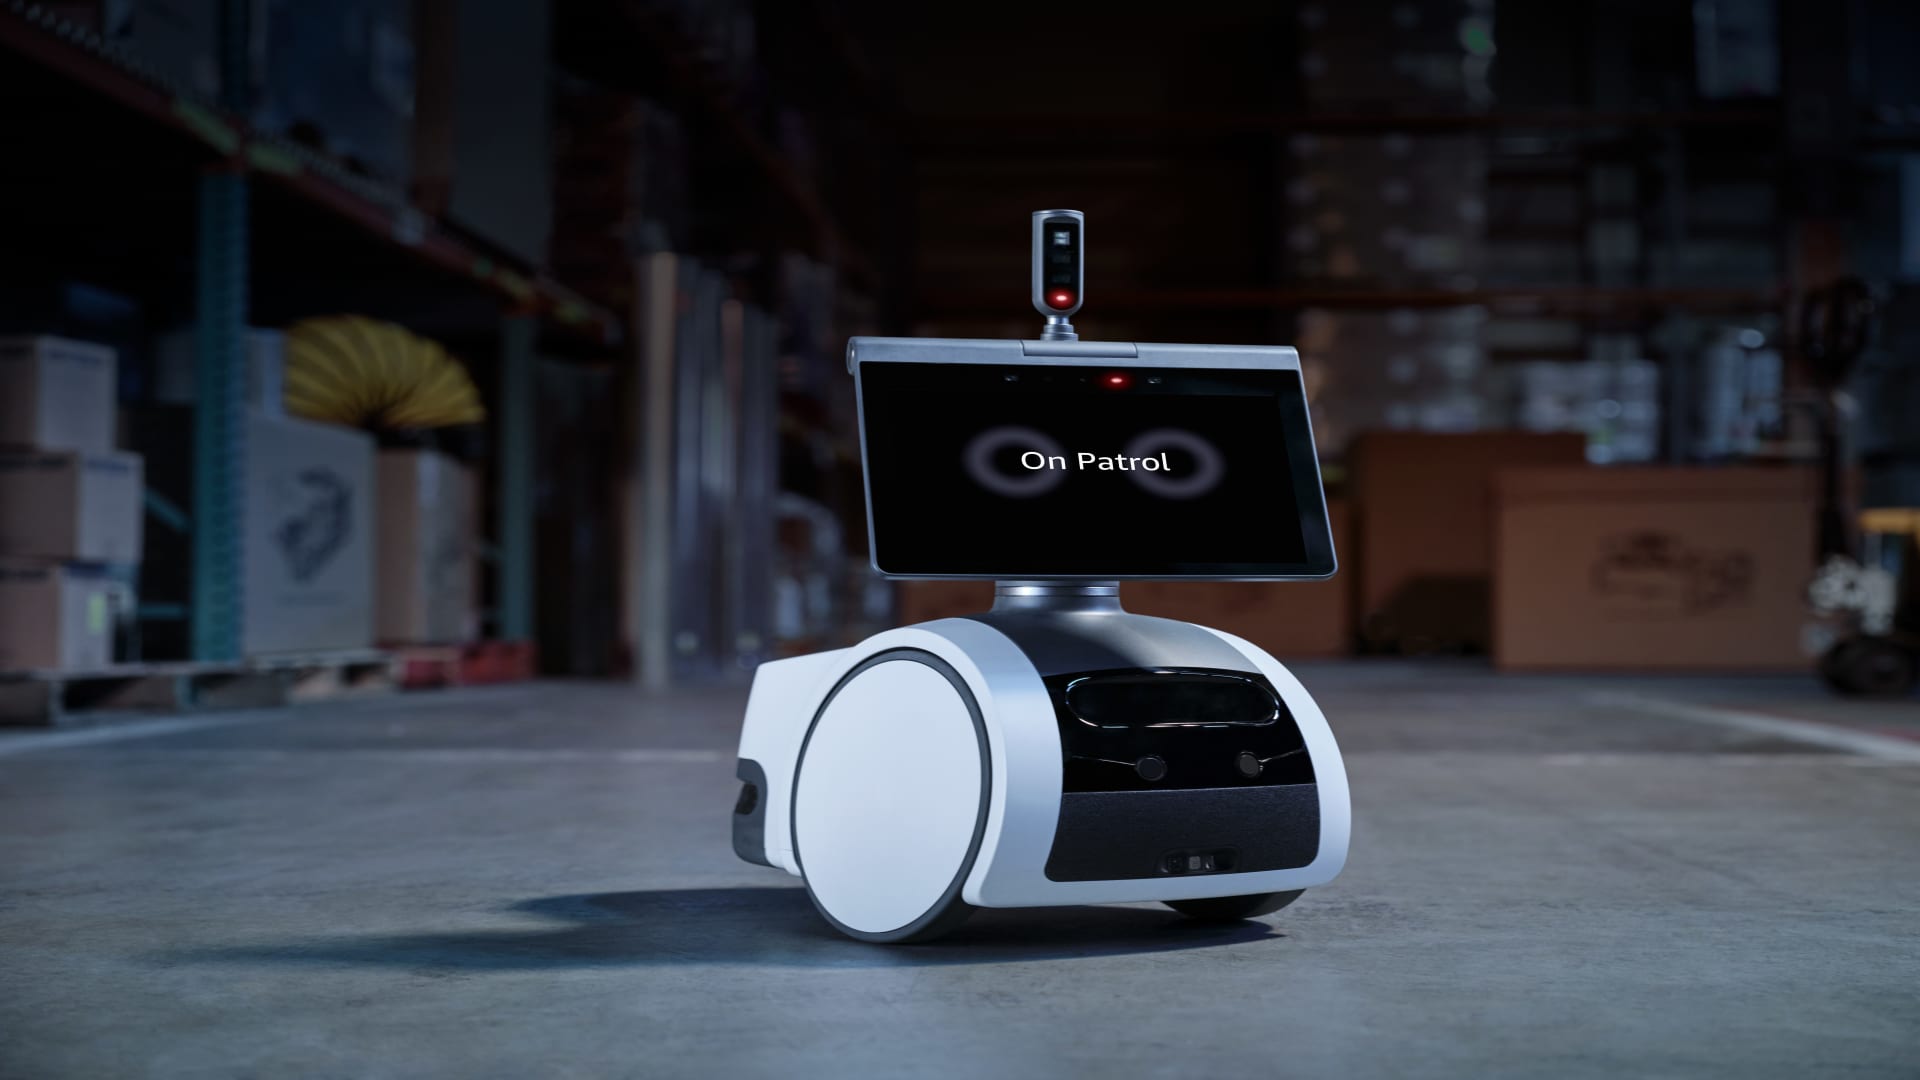 Amazon's Astro robot is now a roving security guard for business